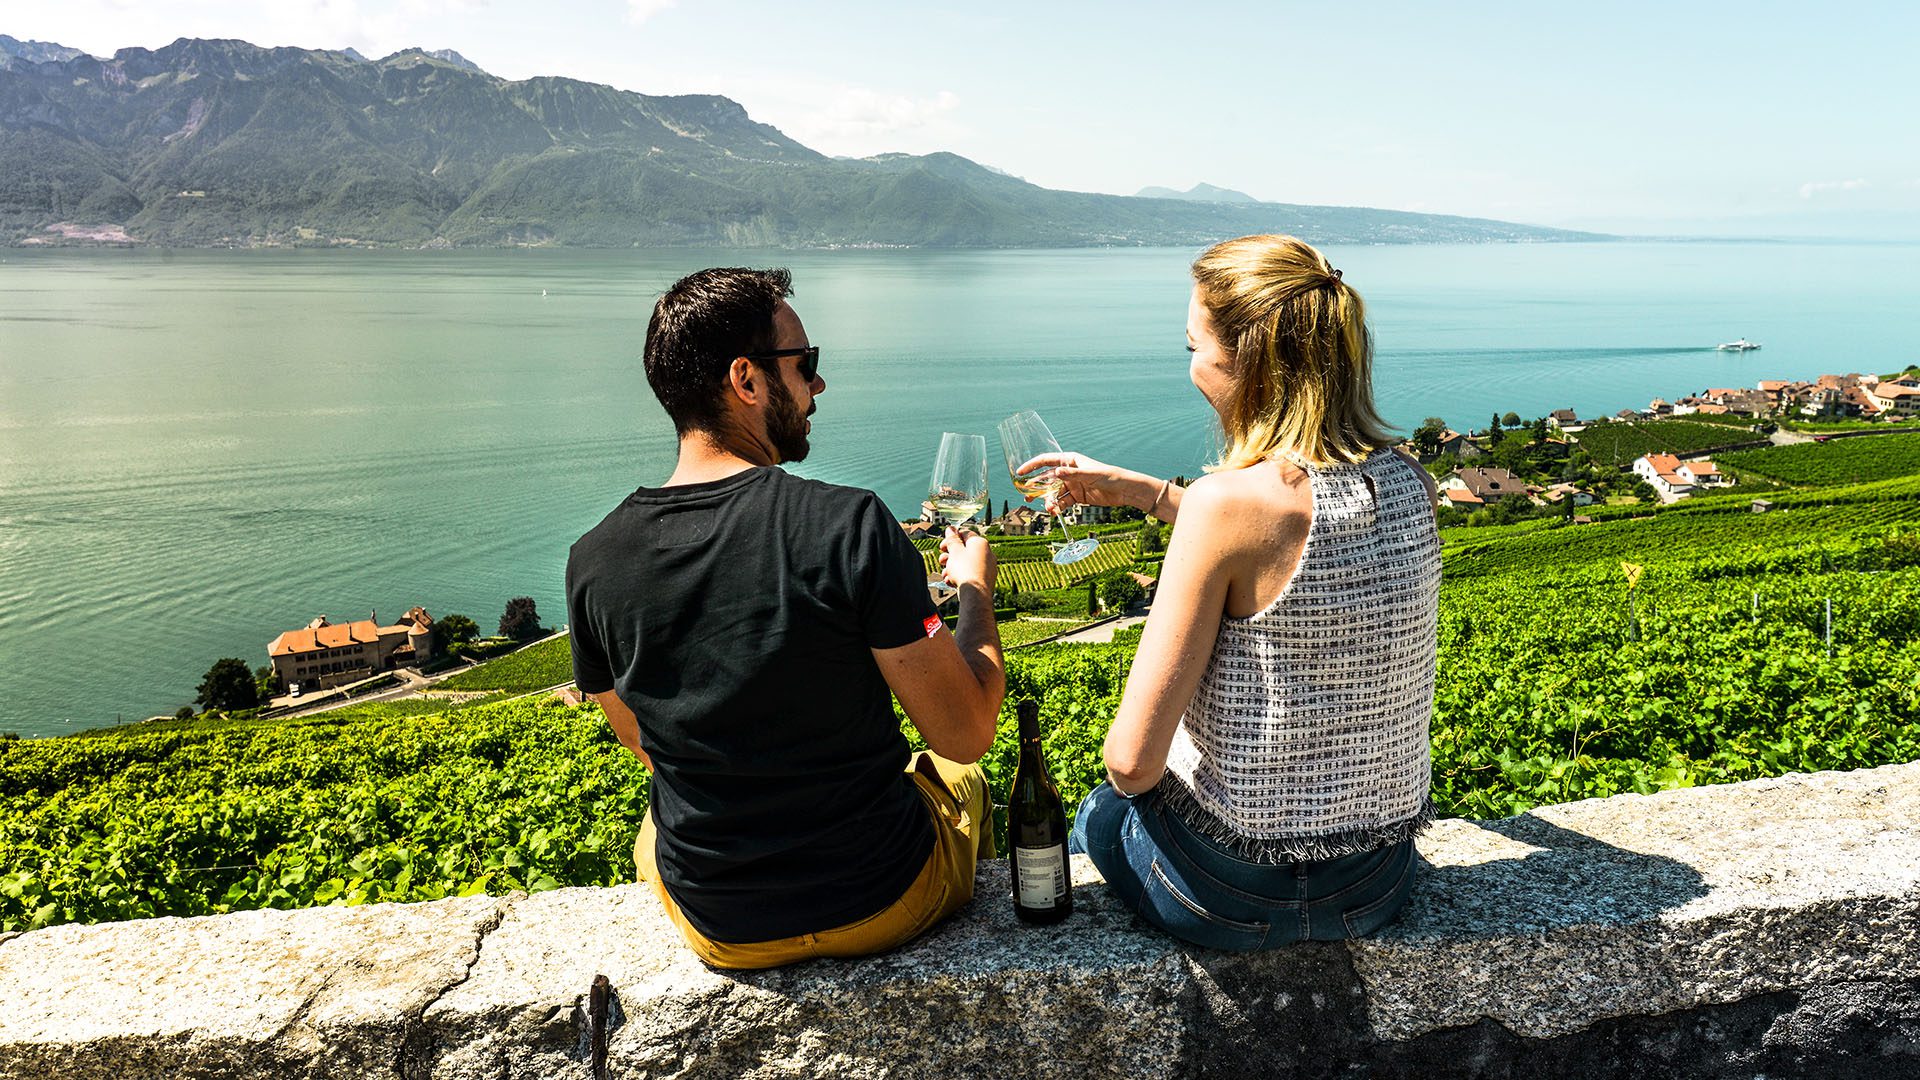 6 unique experiences to fall in love with the canton of Vaud